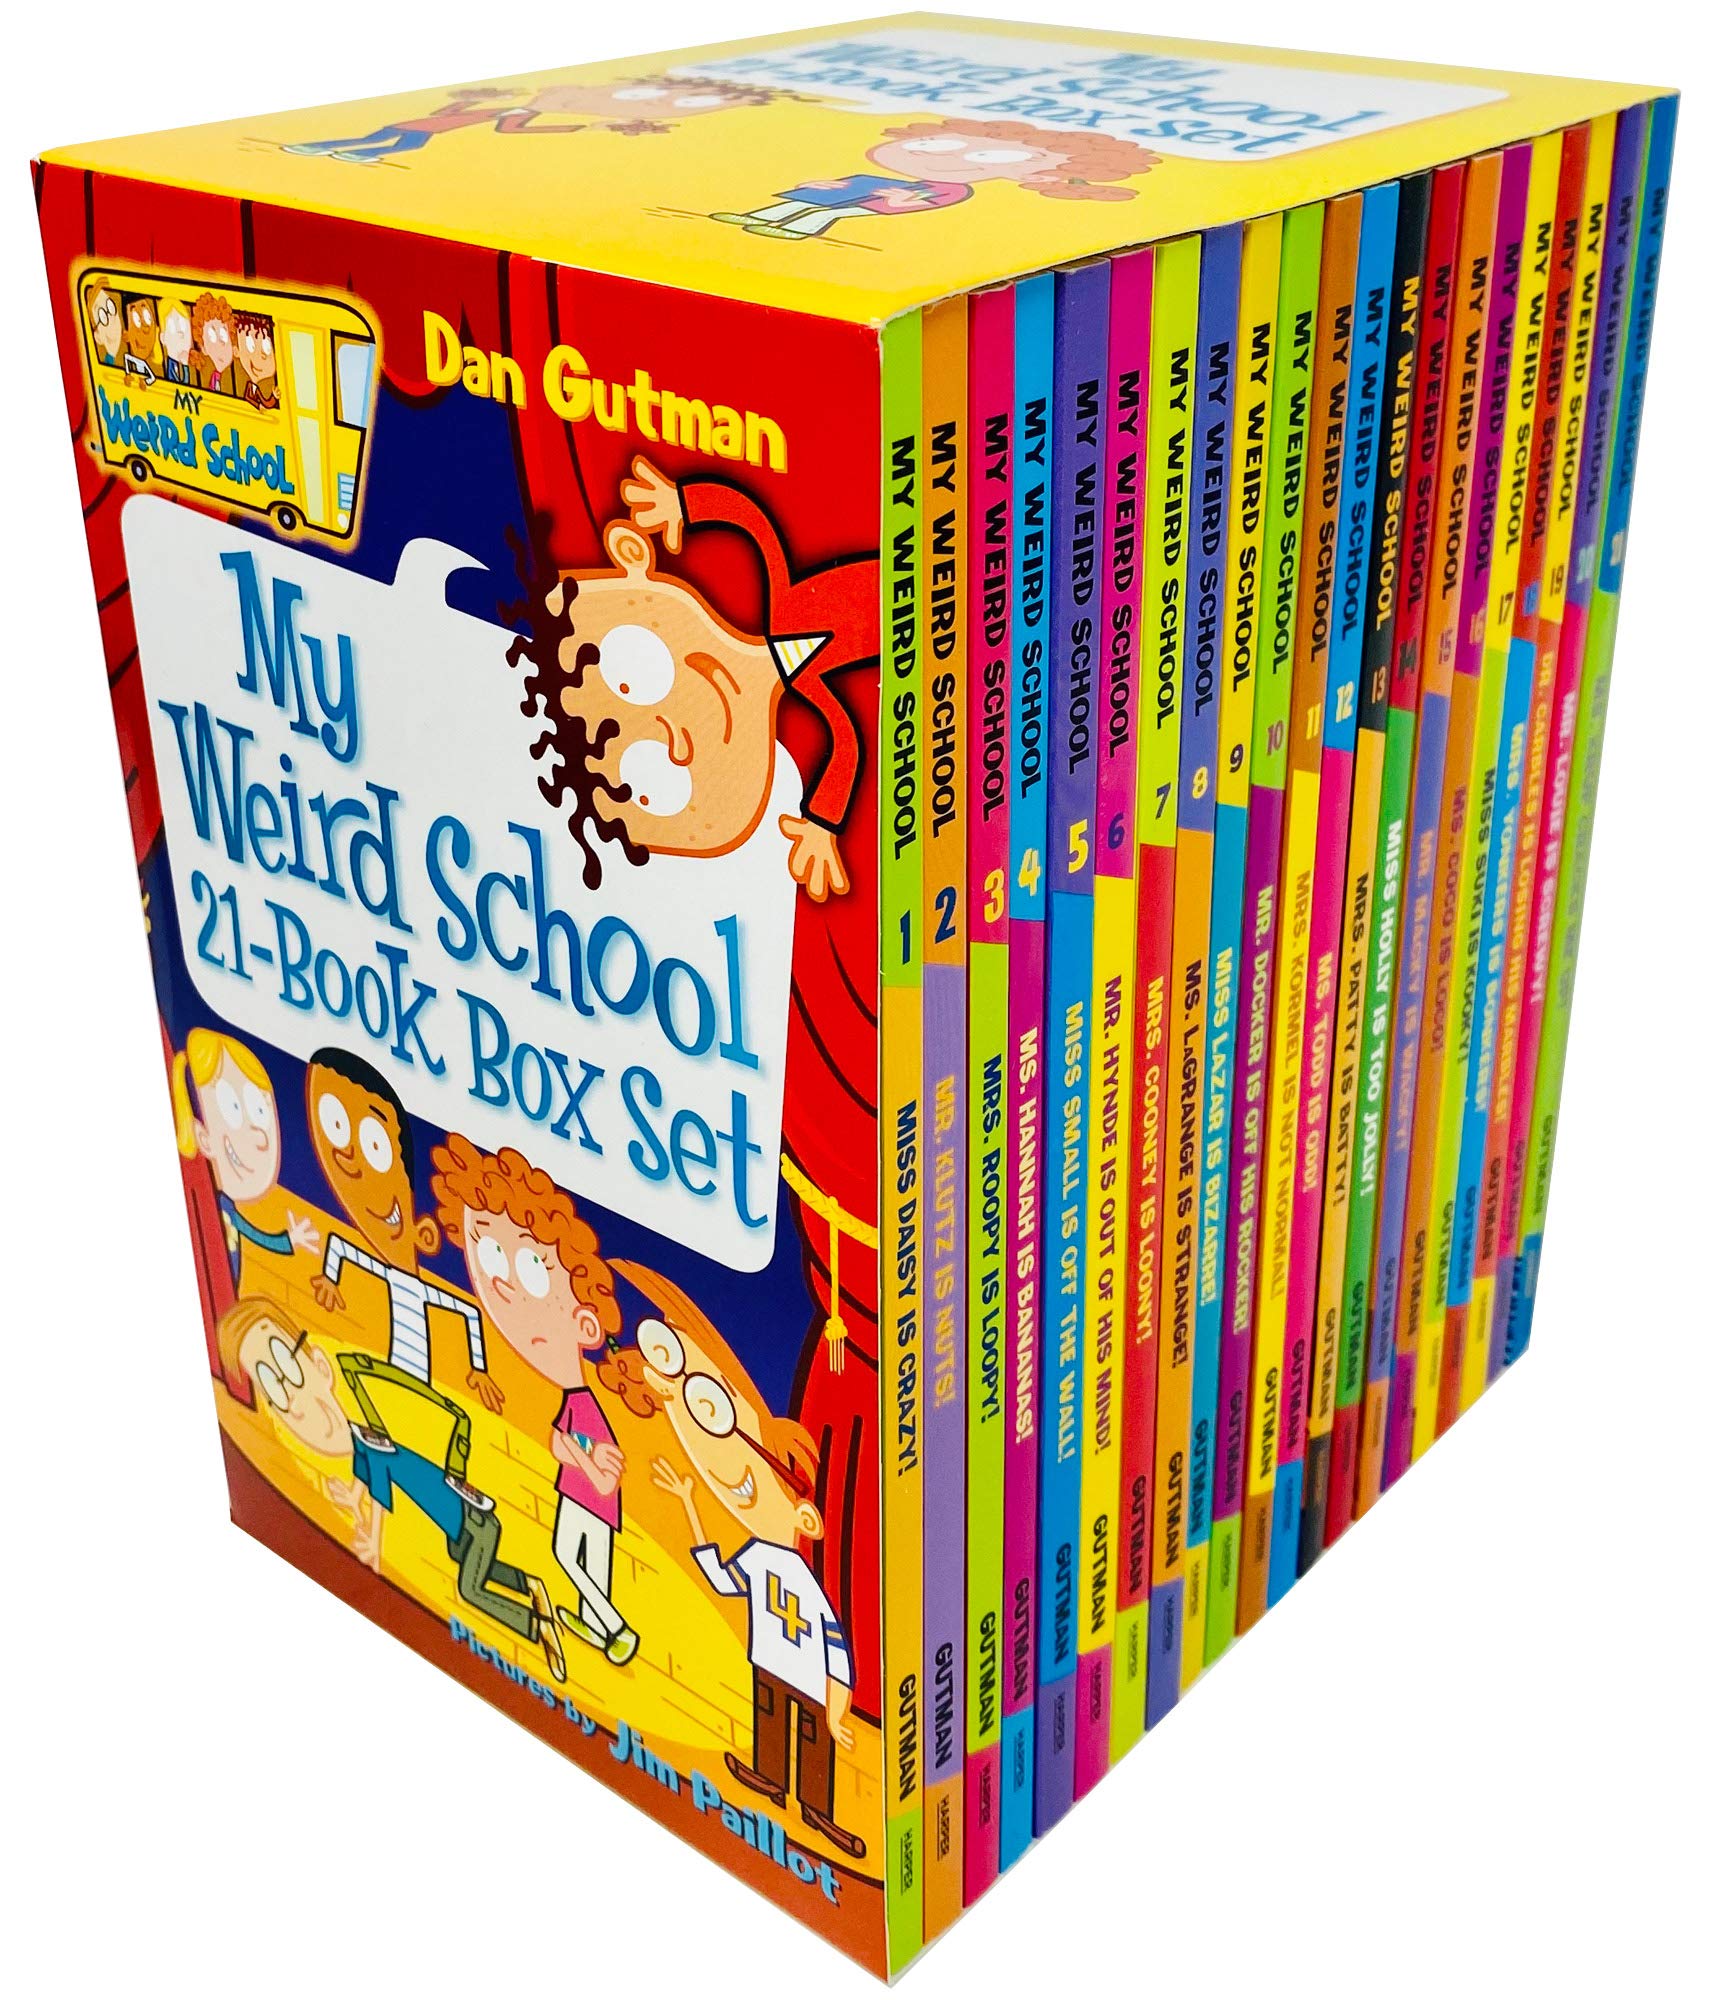 My Weird School 21 Collection Books Box Set by Dan Gutman Paperback - Lets Buy Books